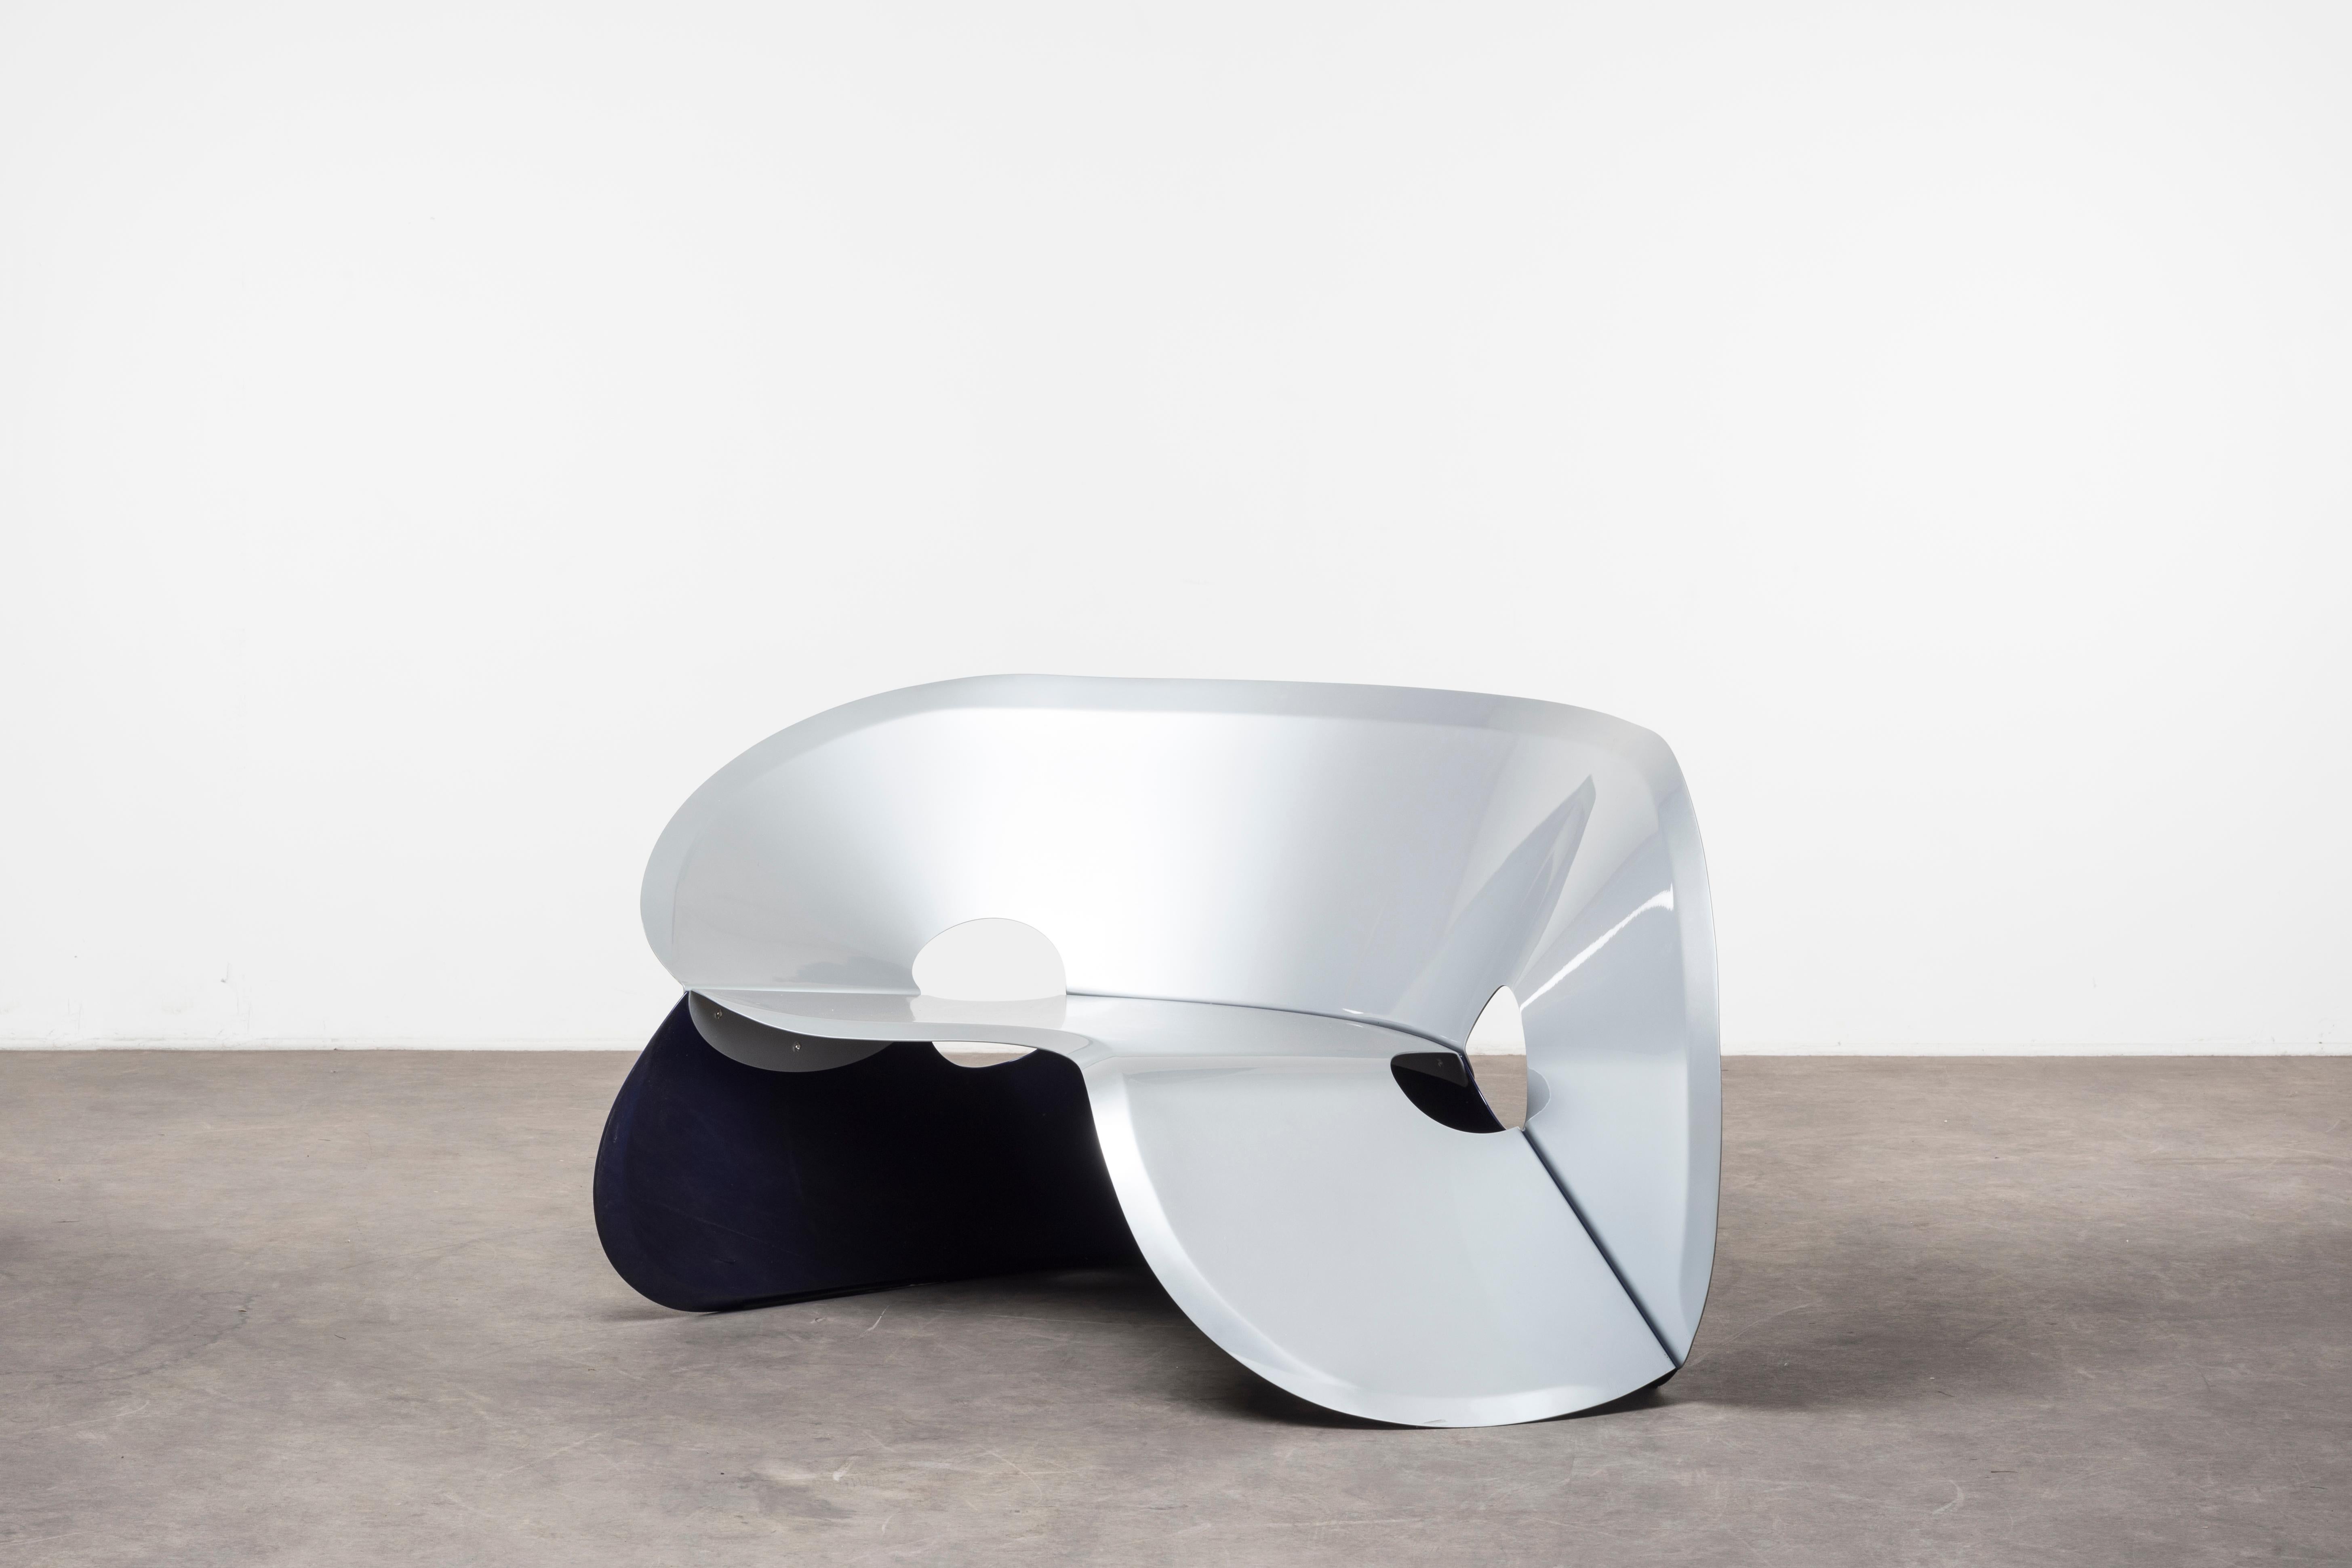 Chaise Oui by Michael Schoner
The Netherlands, 2019. Nilufar Edition. Aluminium, car paint. Measures: 100 x 154 x H 75 cm. 39.4 x 60.6 x H 29.5 in.
Please note: Prices do not include VAT. VAT may be applied depending on the ship-to location.